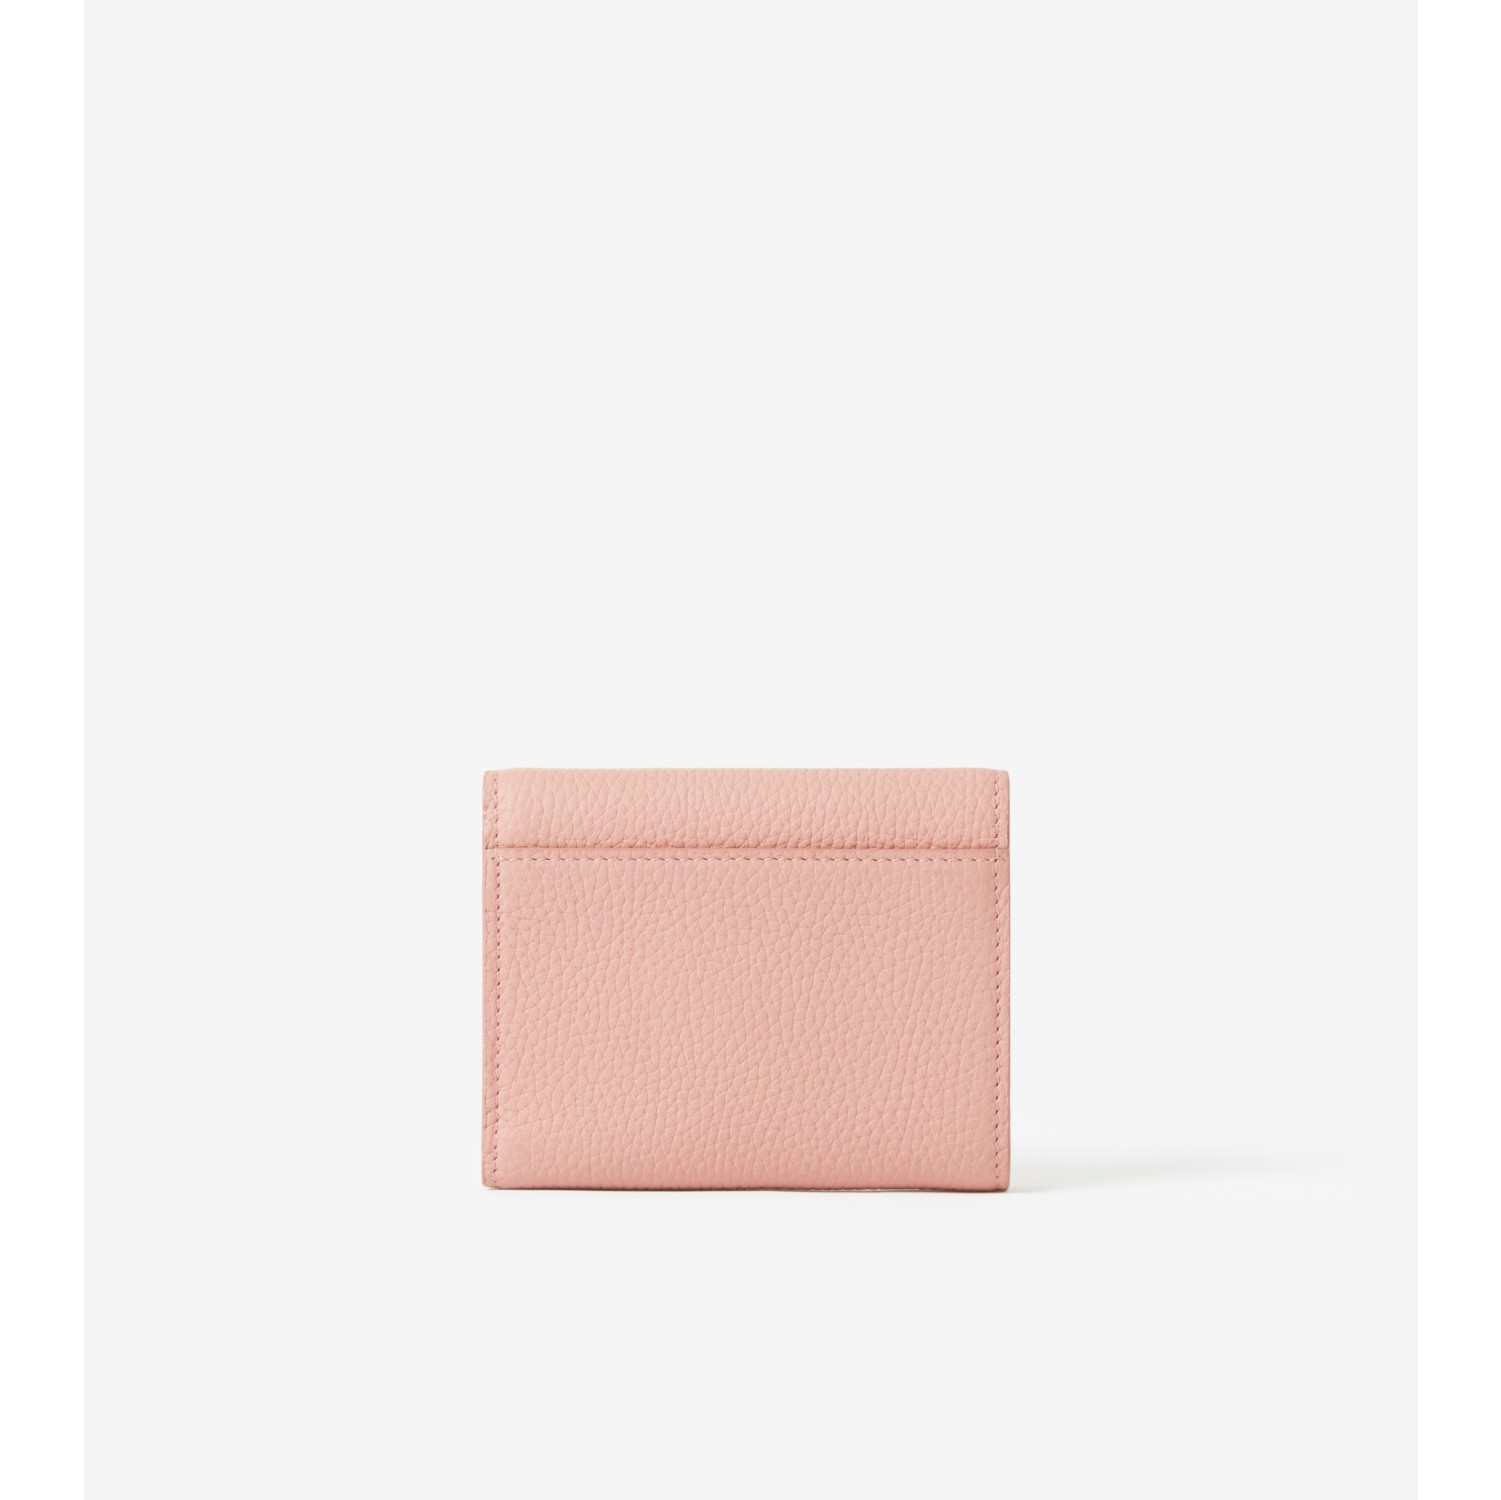 Grainy Leather TB Card Case in Dusky Pink - Women